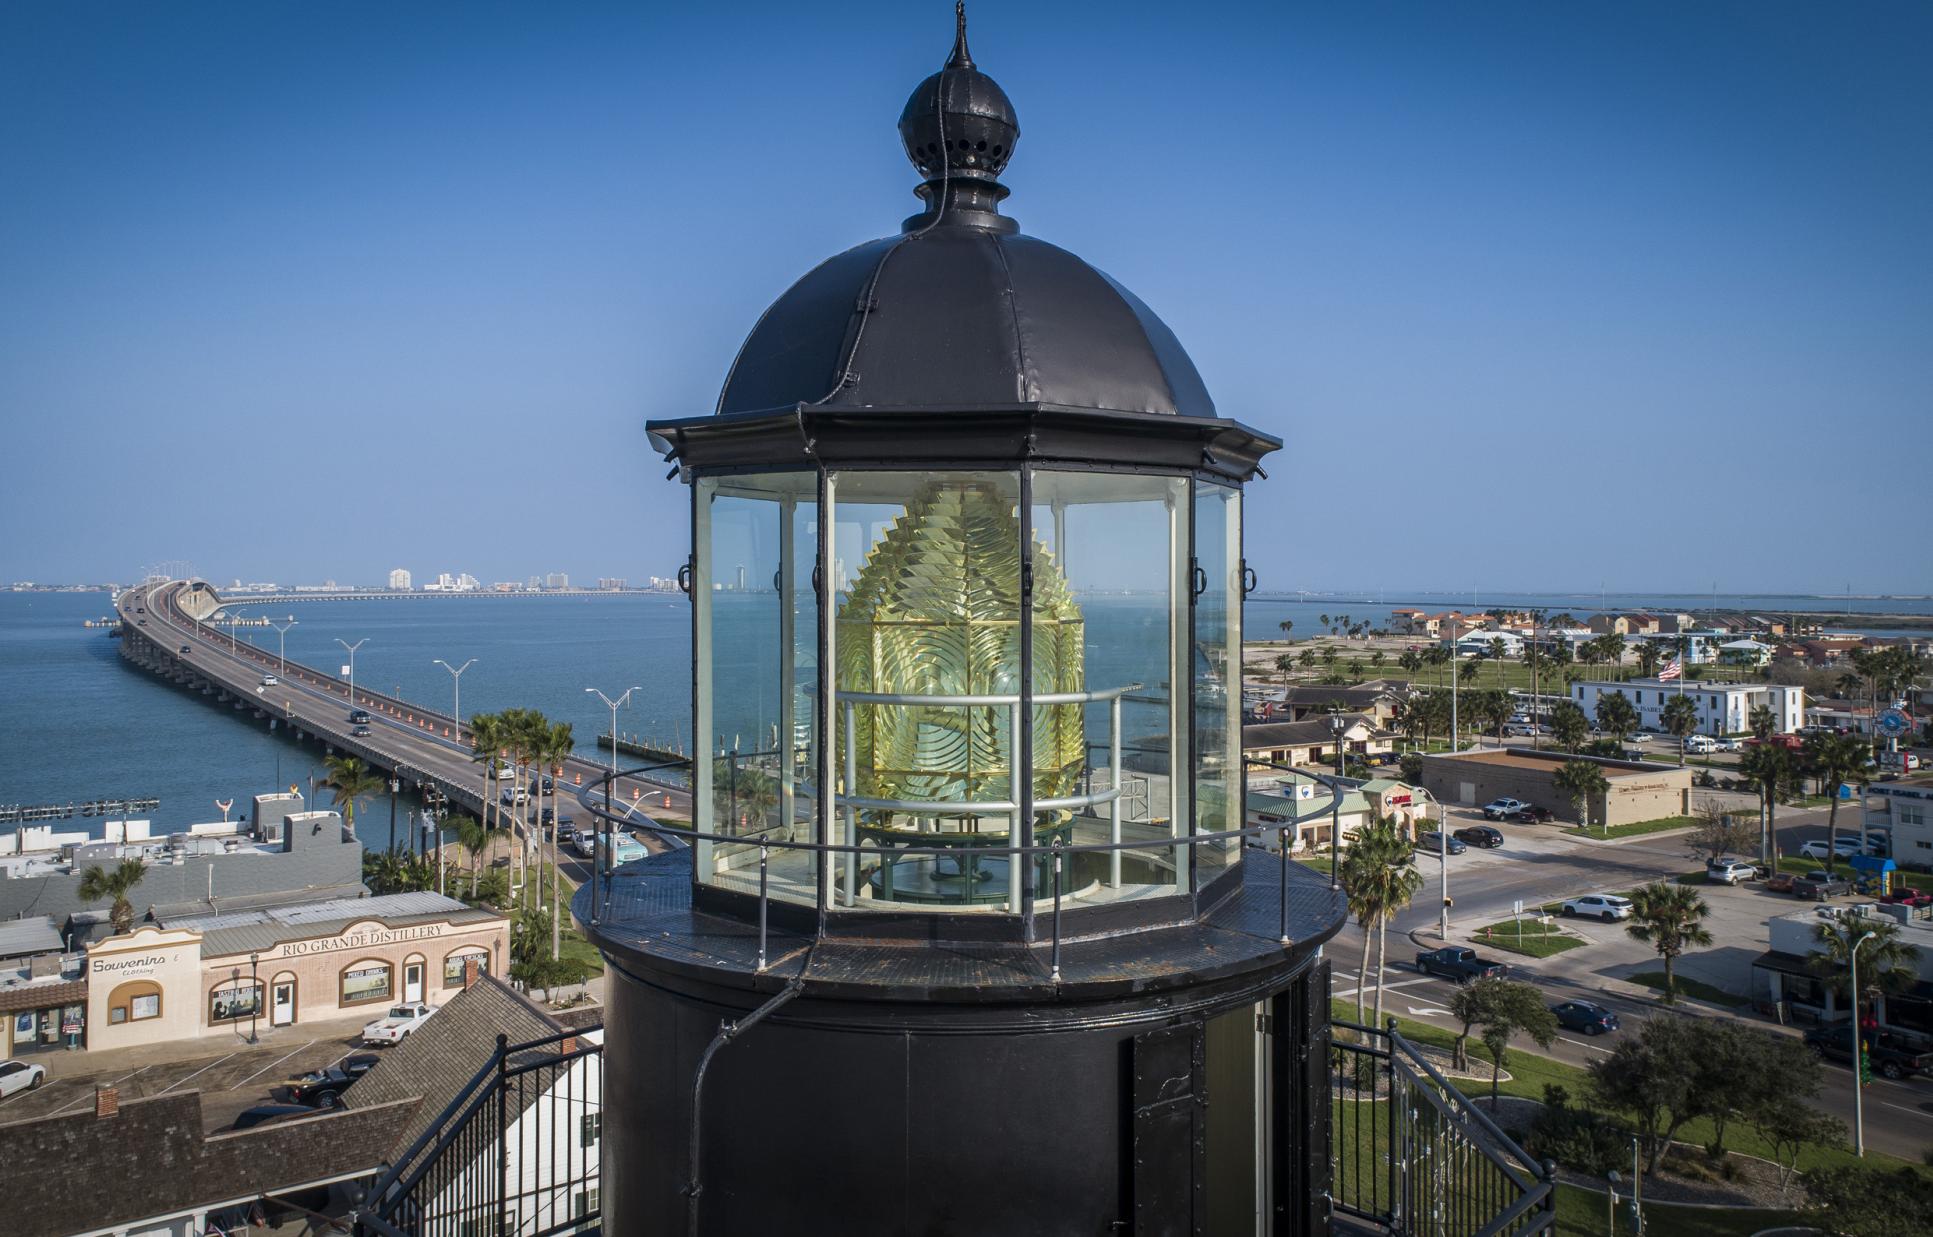 Closeup of the Fresnel Lens of the Port Isabel Lighthouse